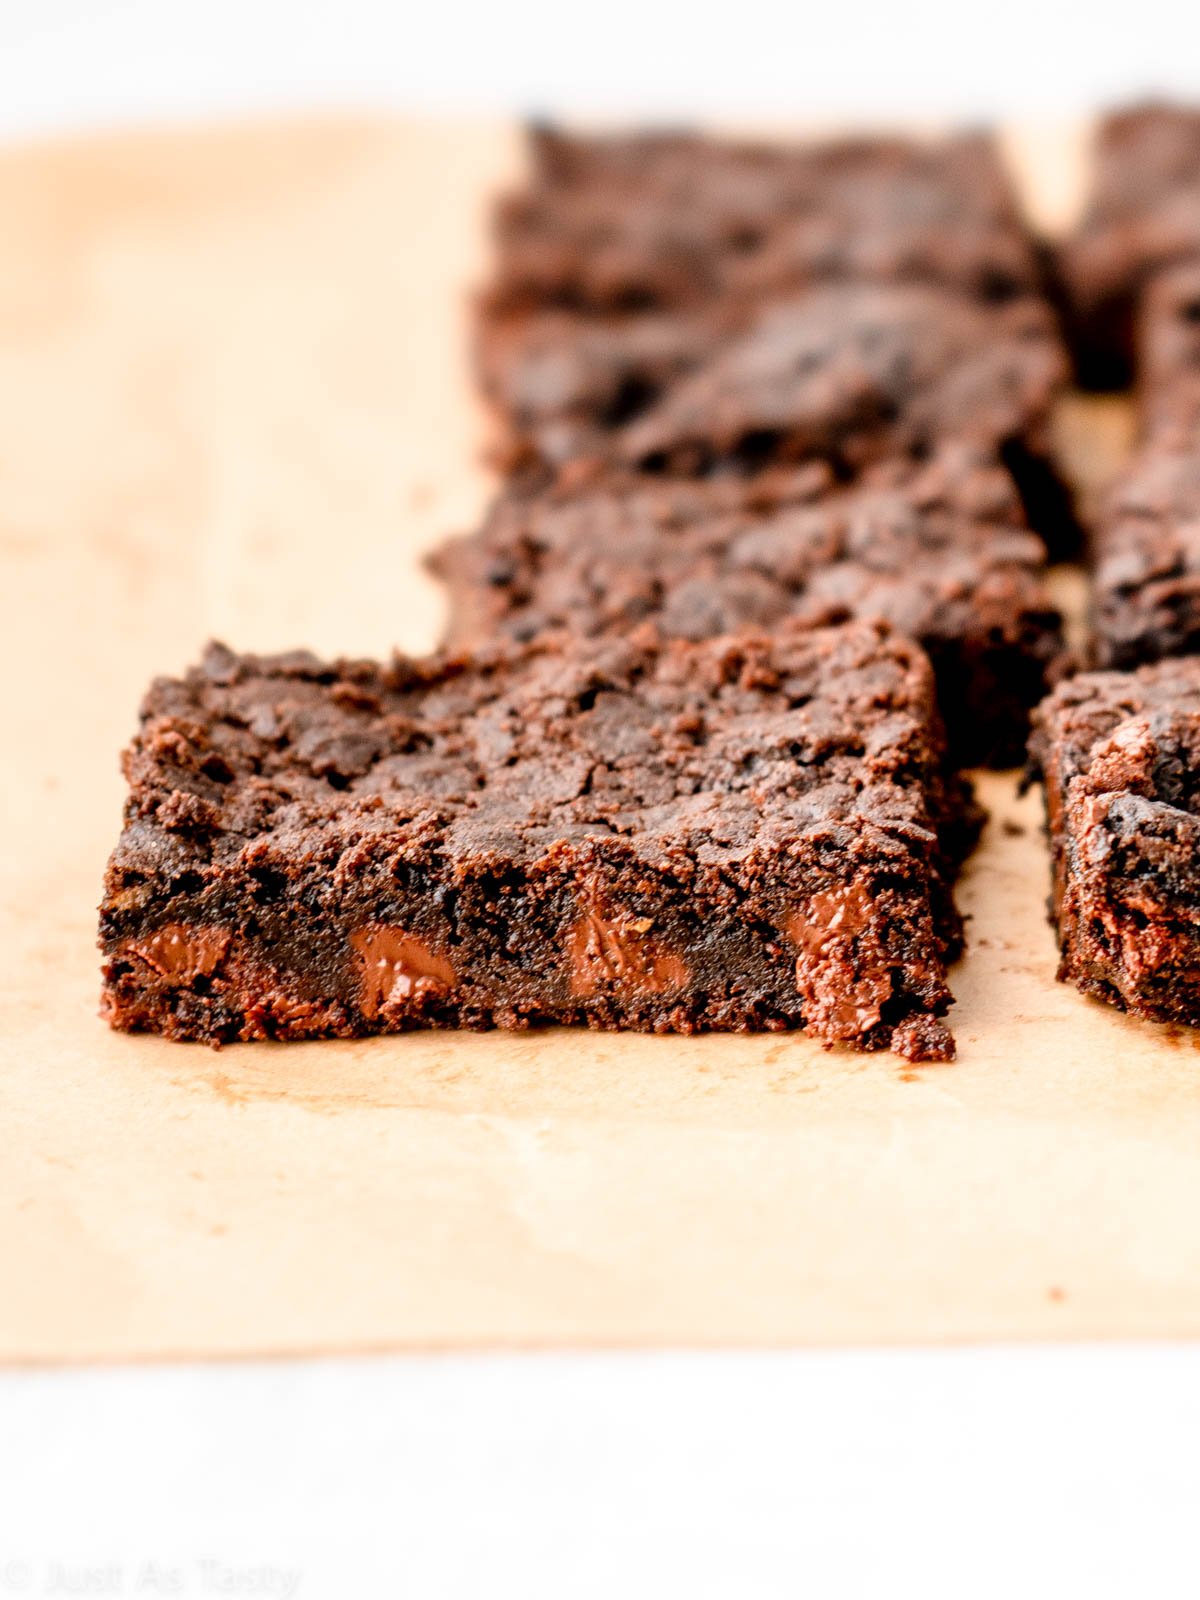 Close-up of a gluten free dairy free brownie.